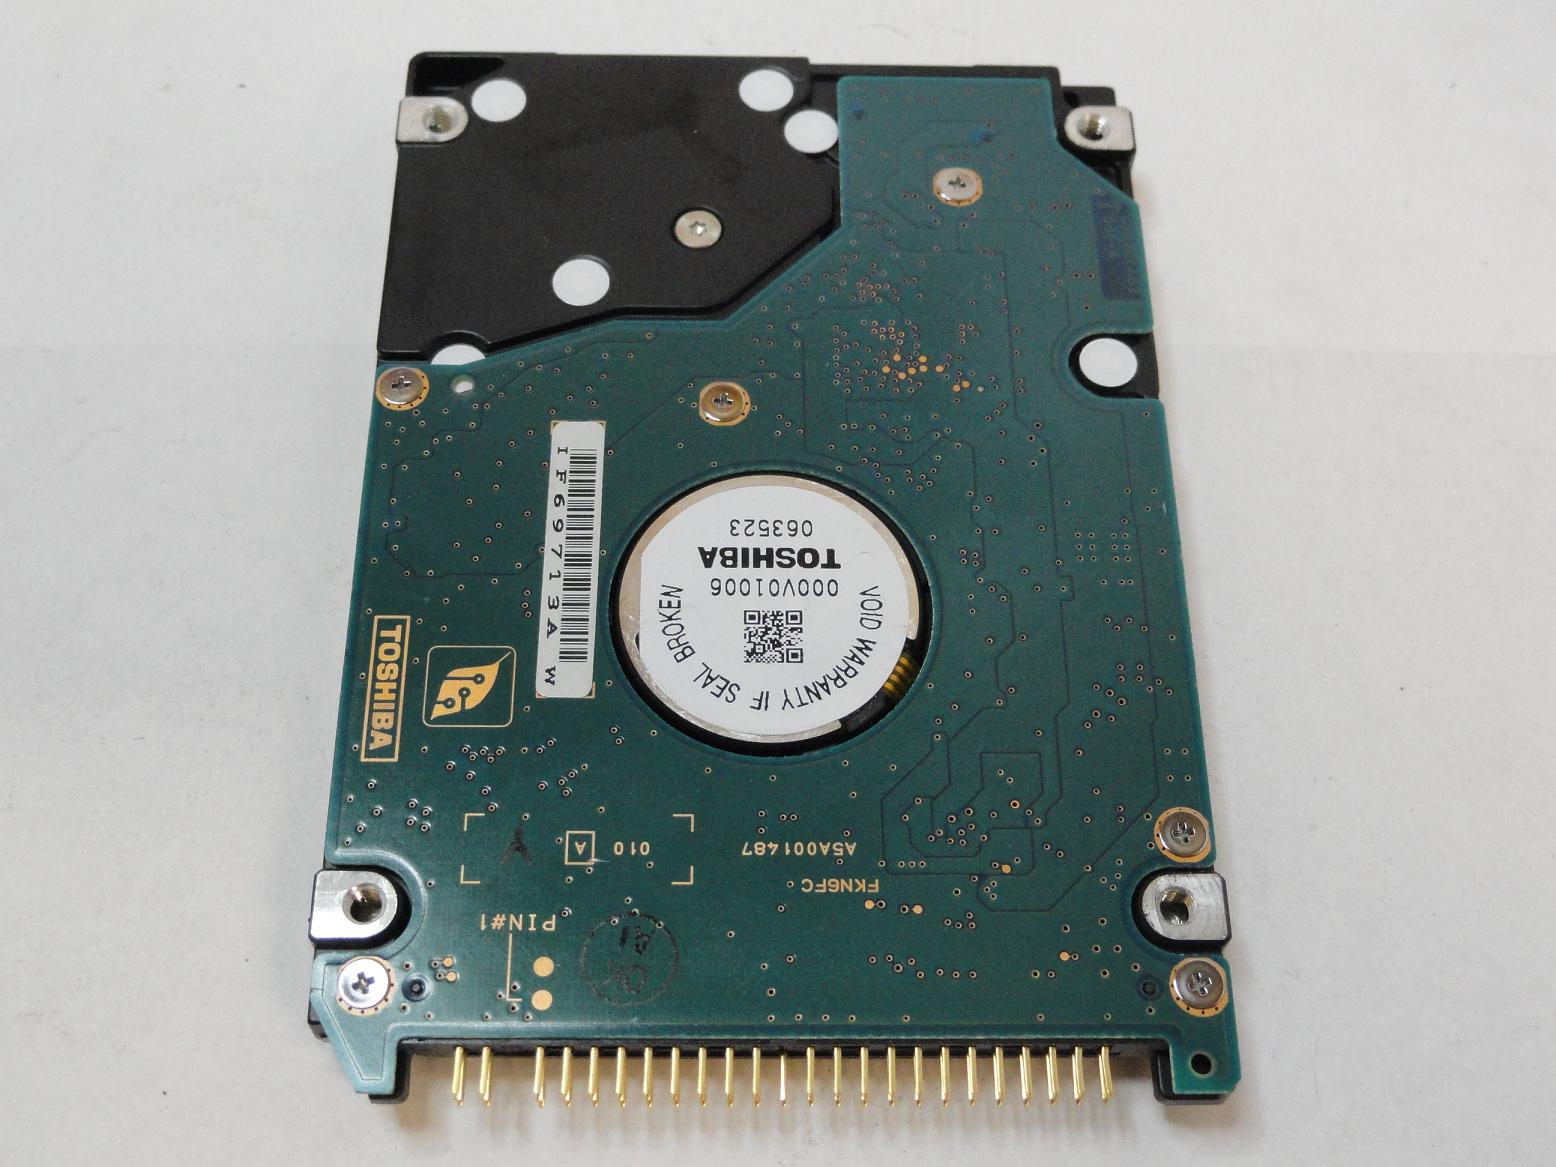 PR14913_HDD2D10_Toshiba HP 40Gb IDE 5400rpm 2.5in HDD - Image2